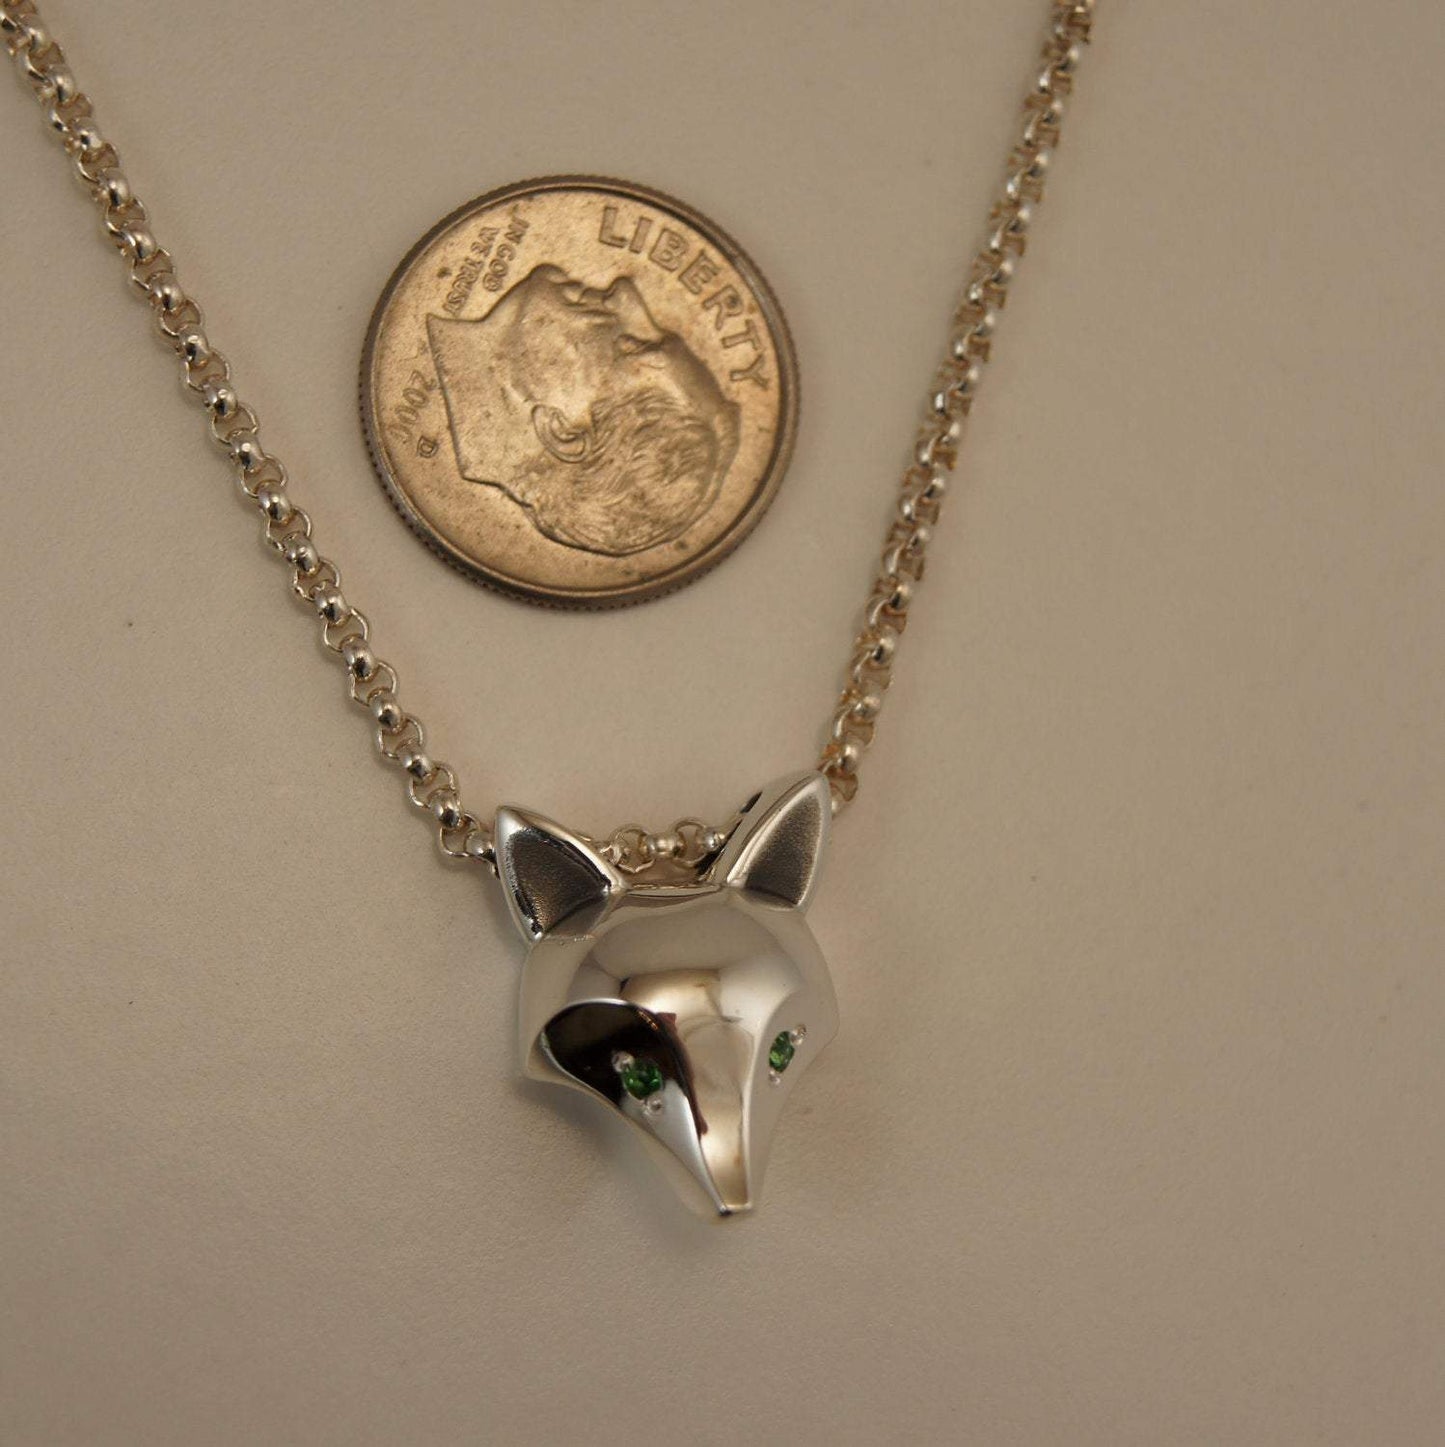 Fox Head Necklace. About Dime Sized made from Bronze, Sterling Silver with a Satin or High Polish Finish. Gemstone Eyes - lots of colors available. Jewelry by Sculpture artist Michael Tatom at Sorrel Sky Gallery. Fox Jewelry.